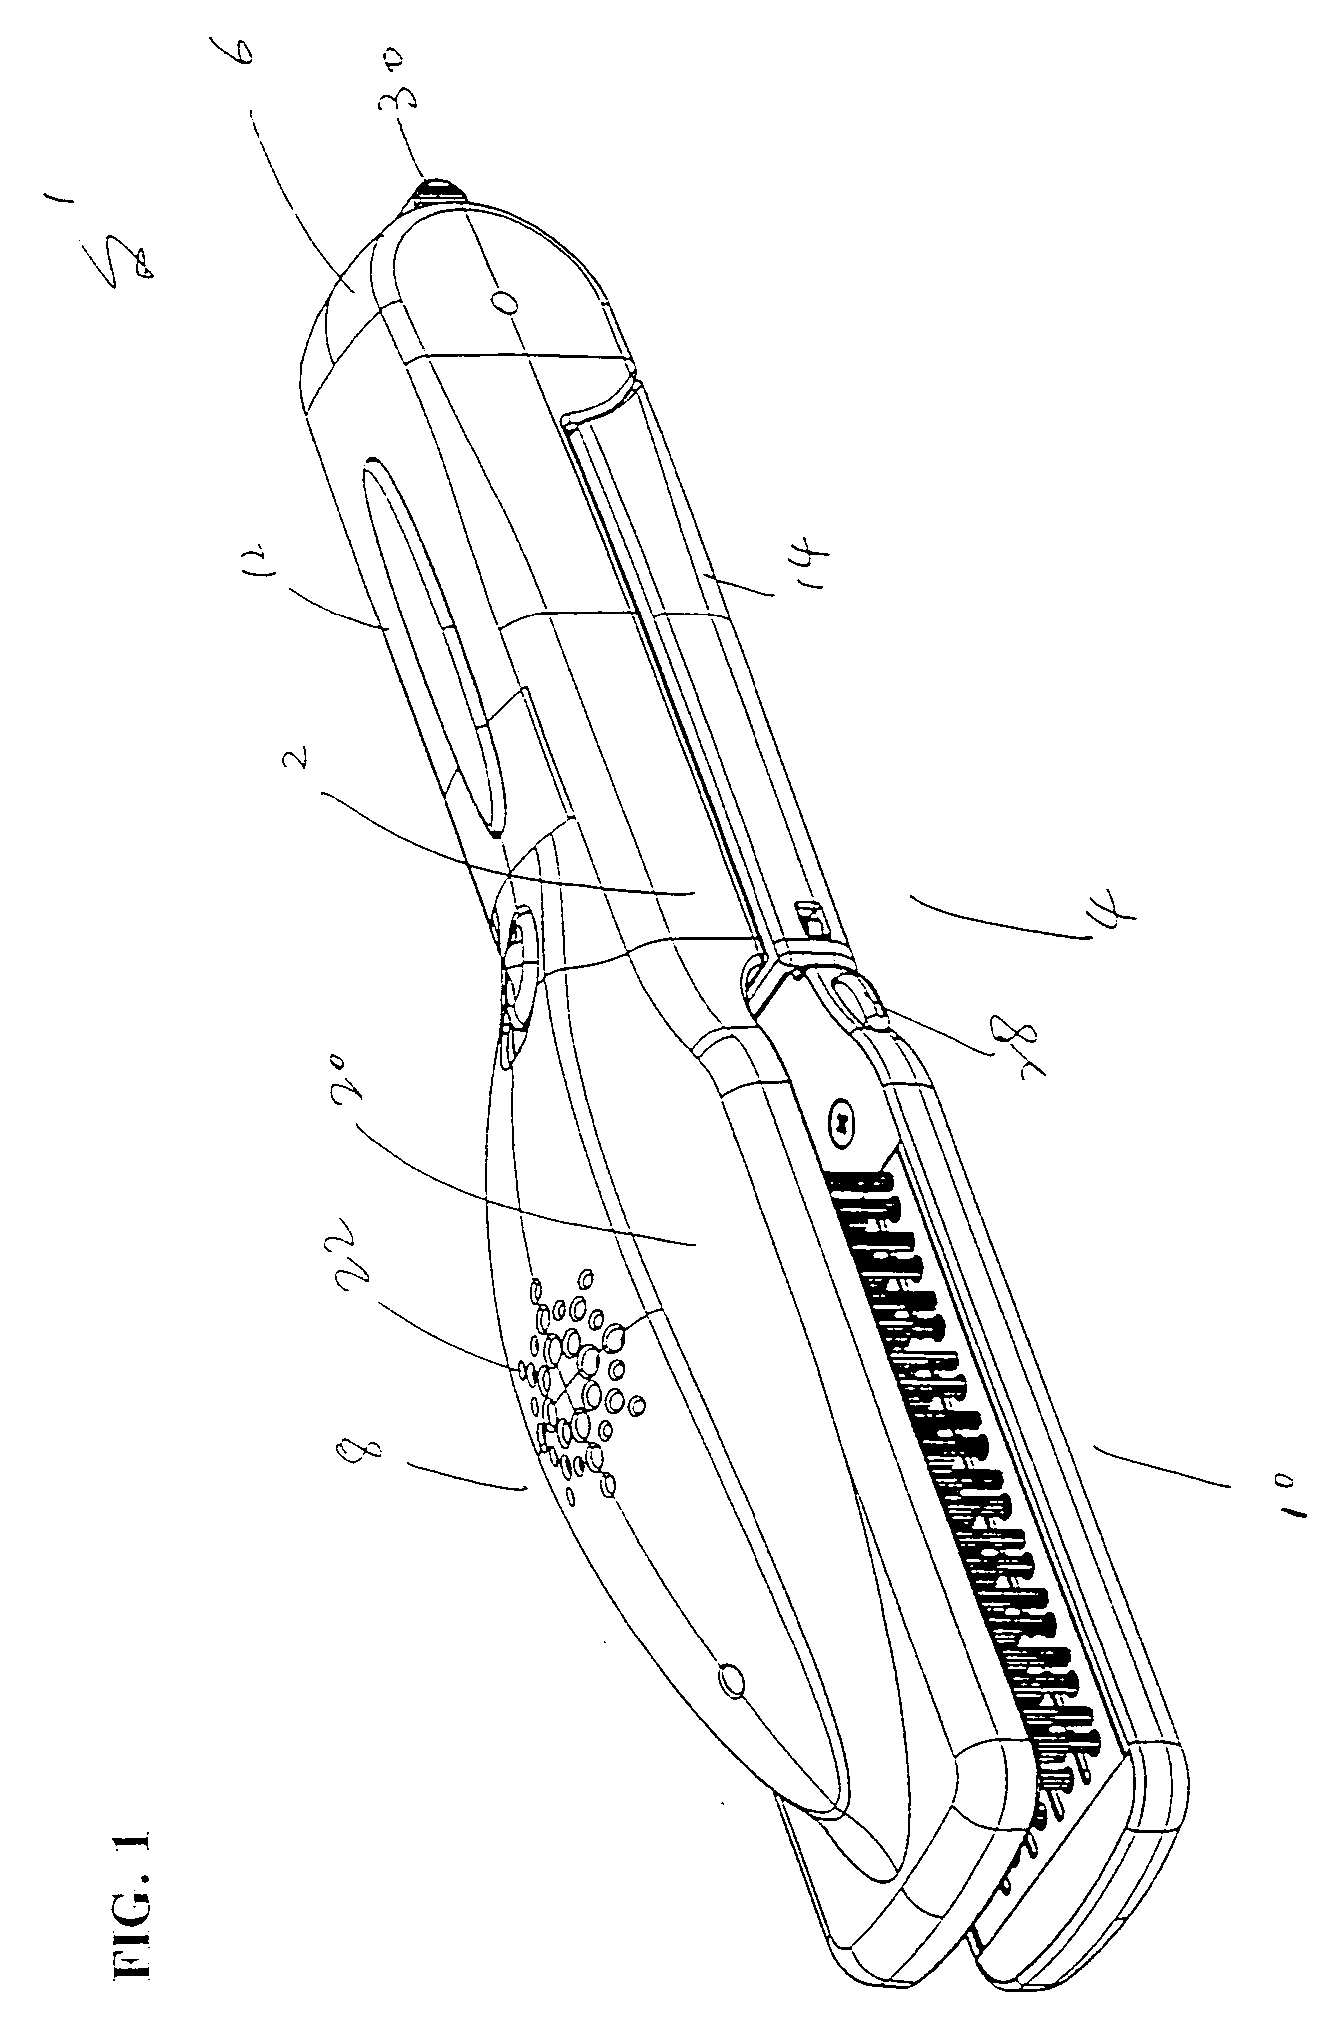 Device for treating hair